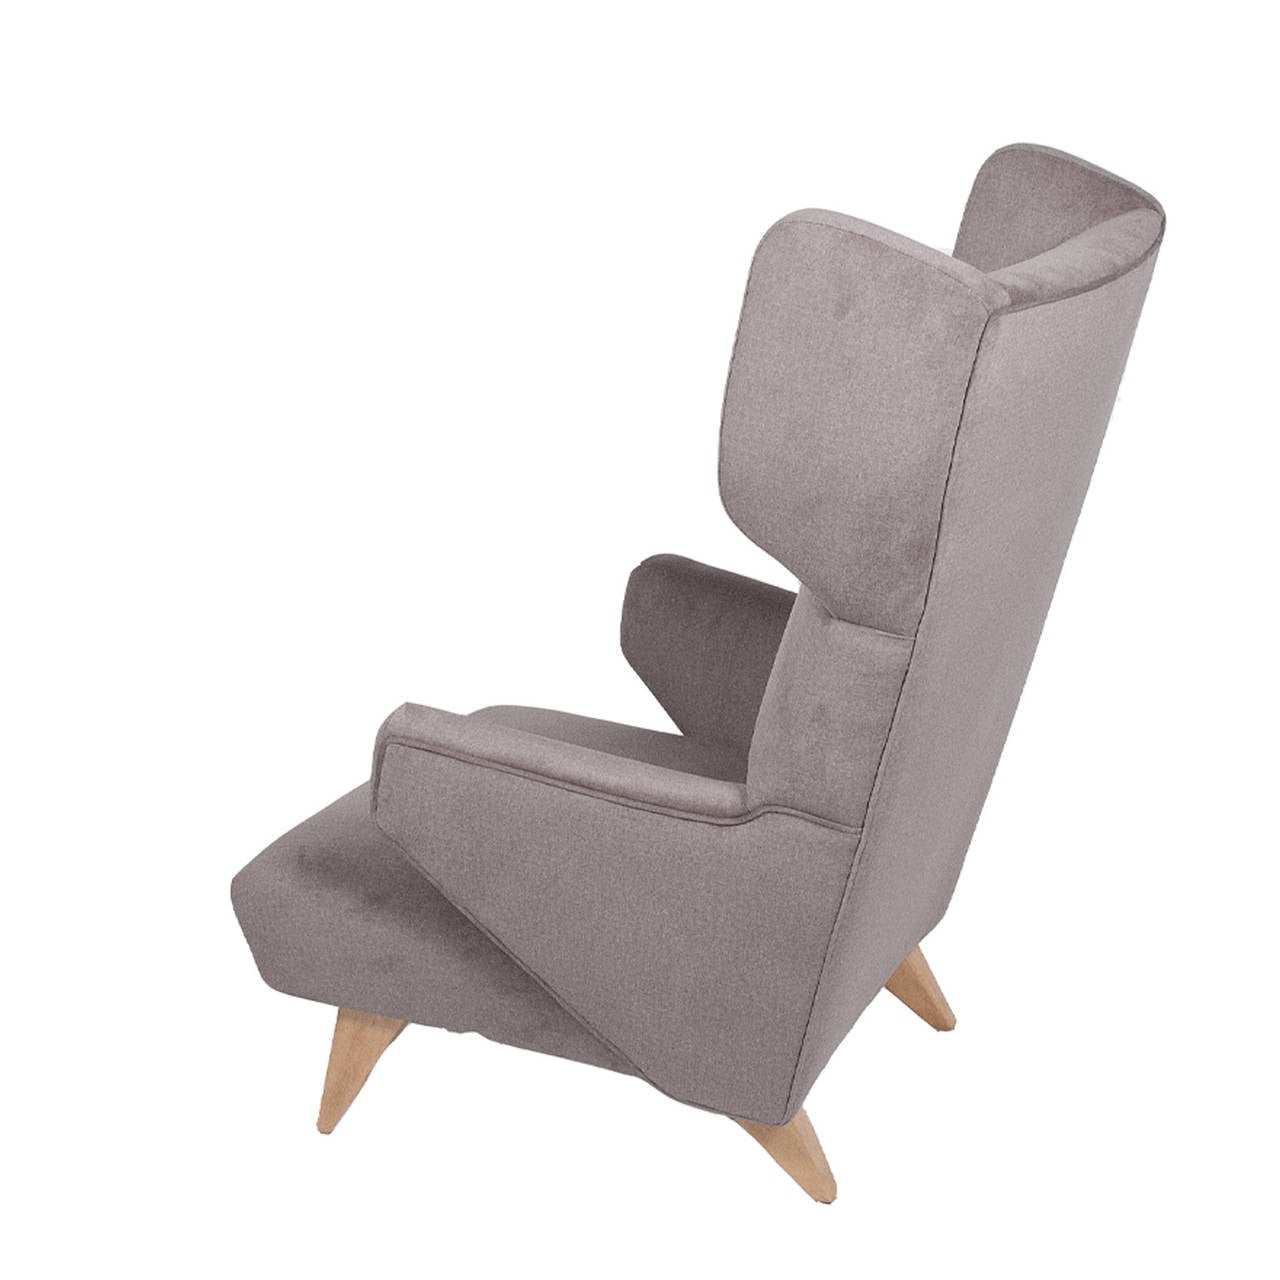 Rare high back version of Risom's chair design for Knoll. Small jutting arms, wing back with flattened tapering birch legs, new velveteen upholstered.